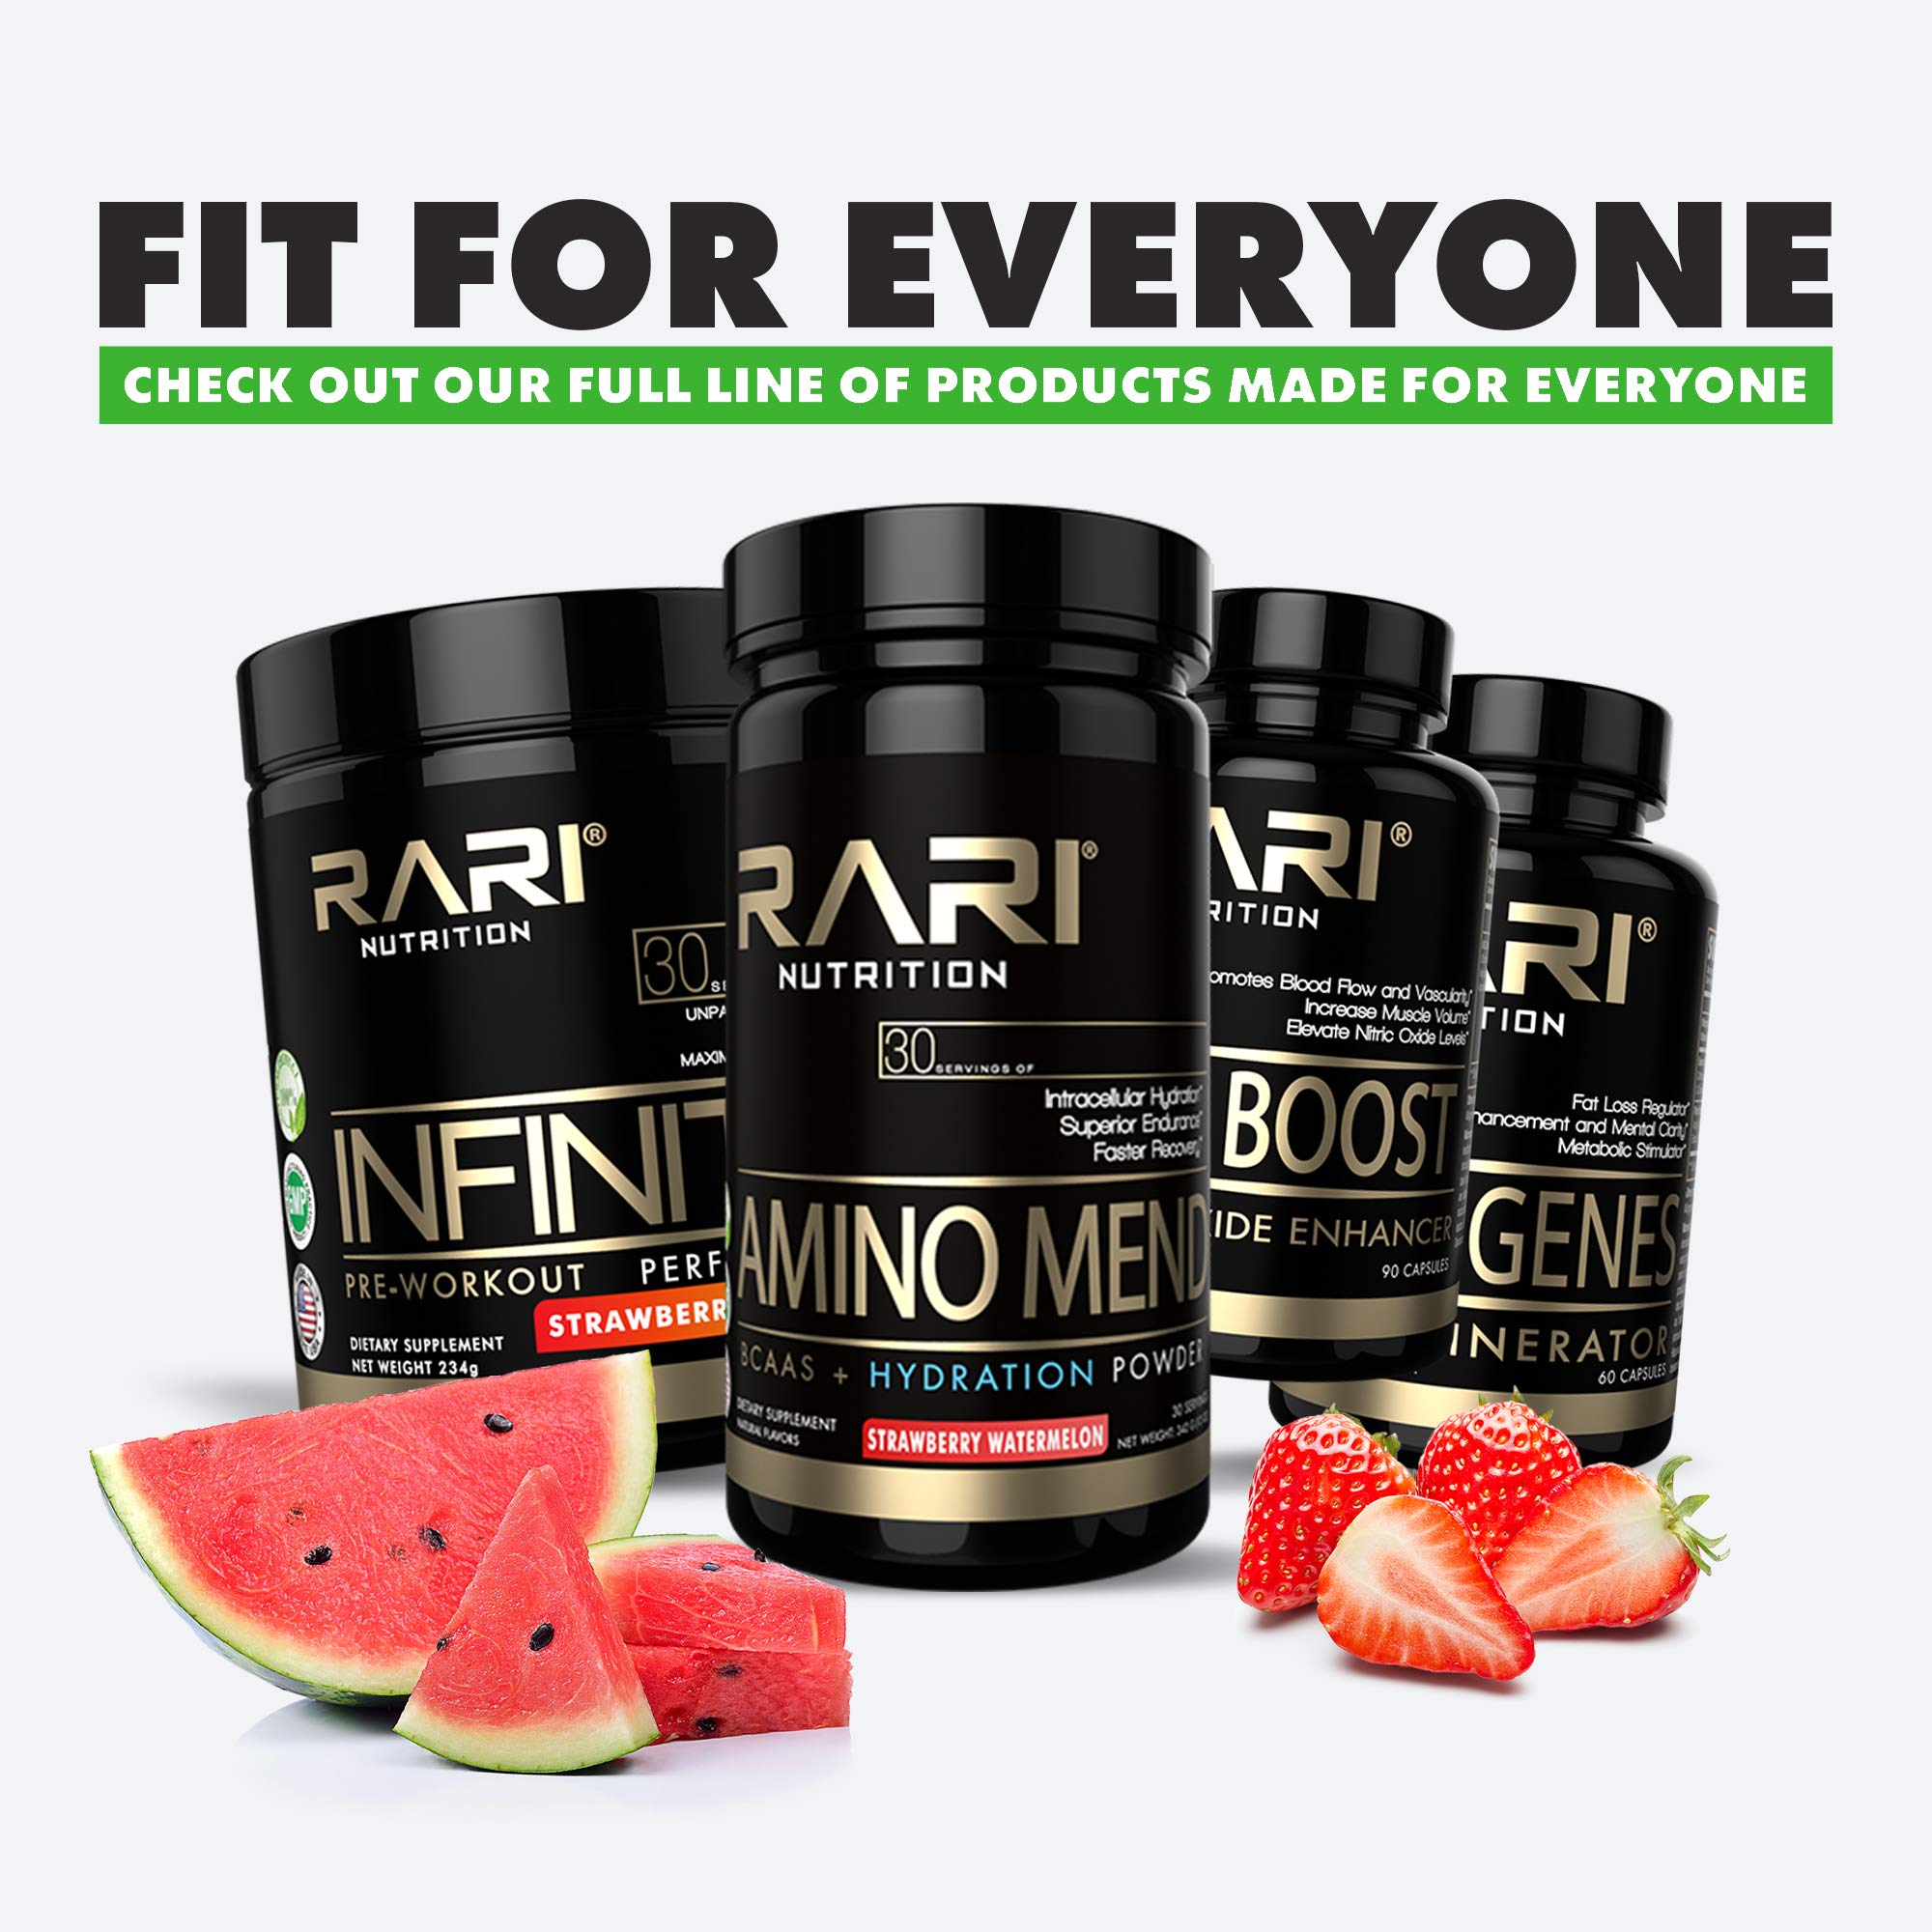 RARI Nutrition - INFINITY Preworkout - 100% Natural Pre Workout Powder - Keto and Vegan Friendly - Energy, Focus, and Performance - Men and Women - No Creatine - 30 Servings (Strawberry Lemonade)